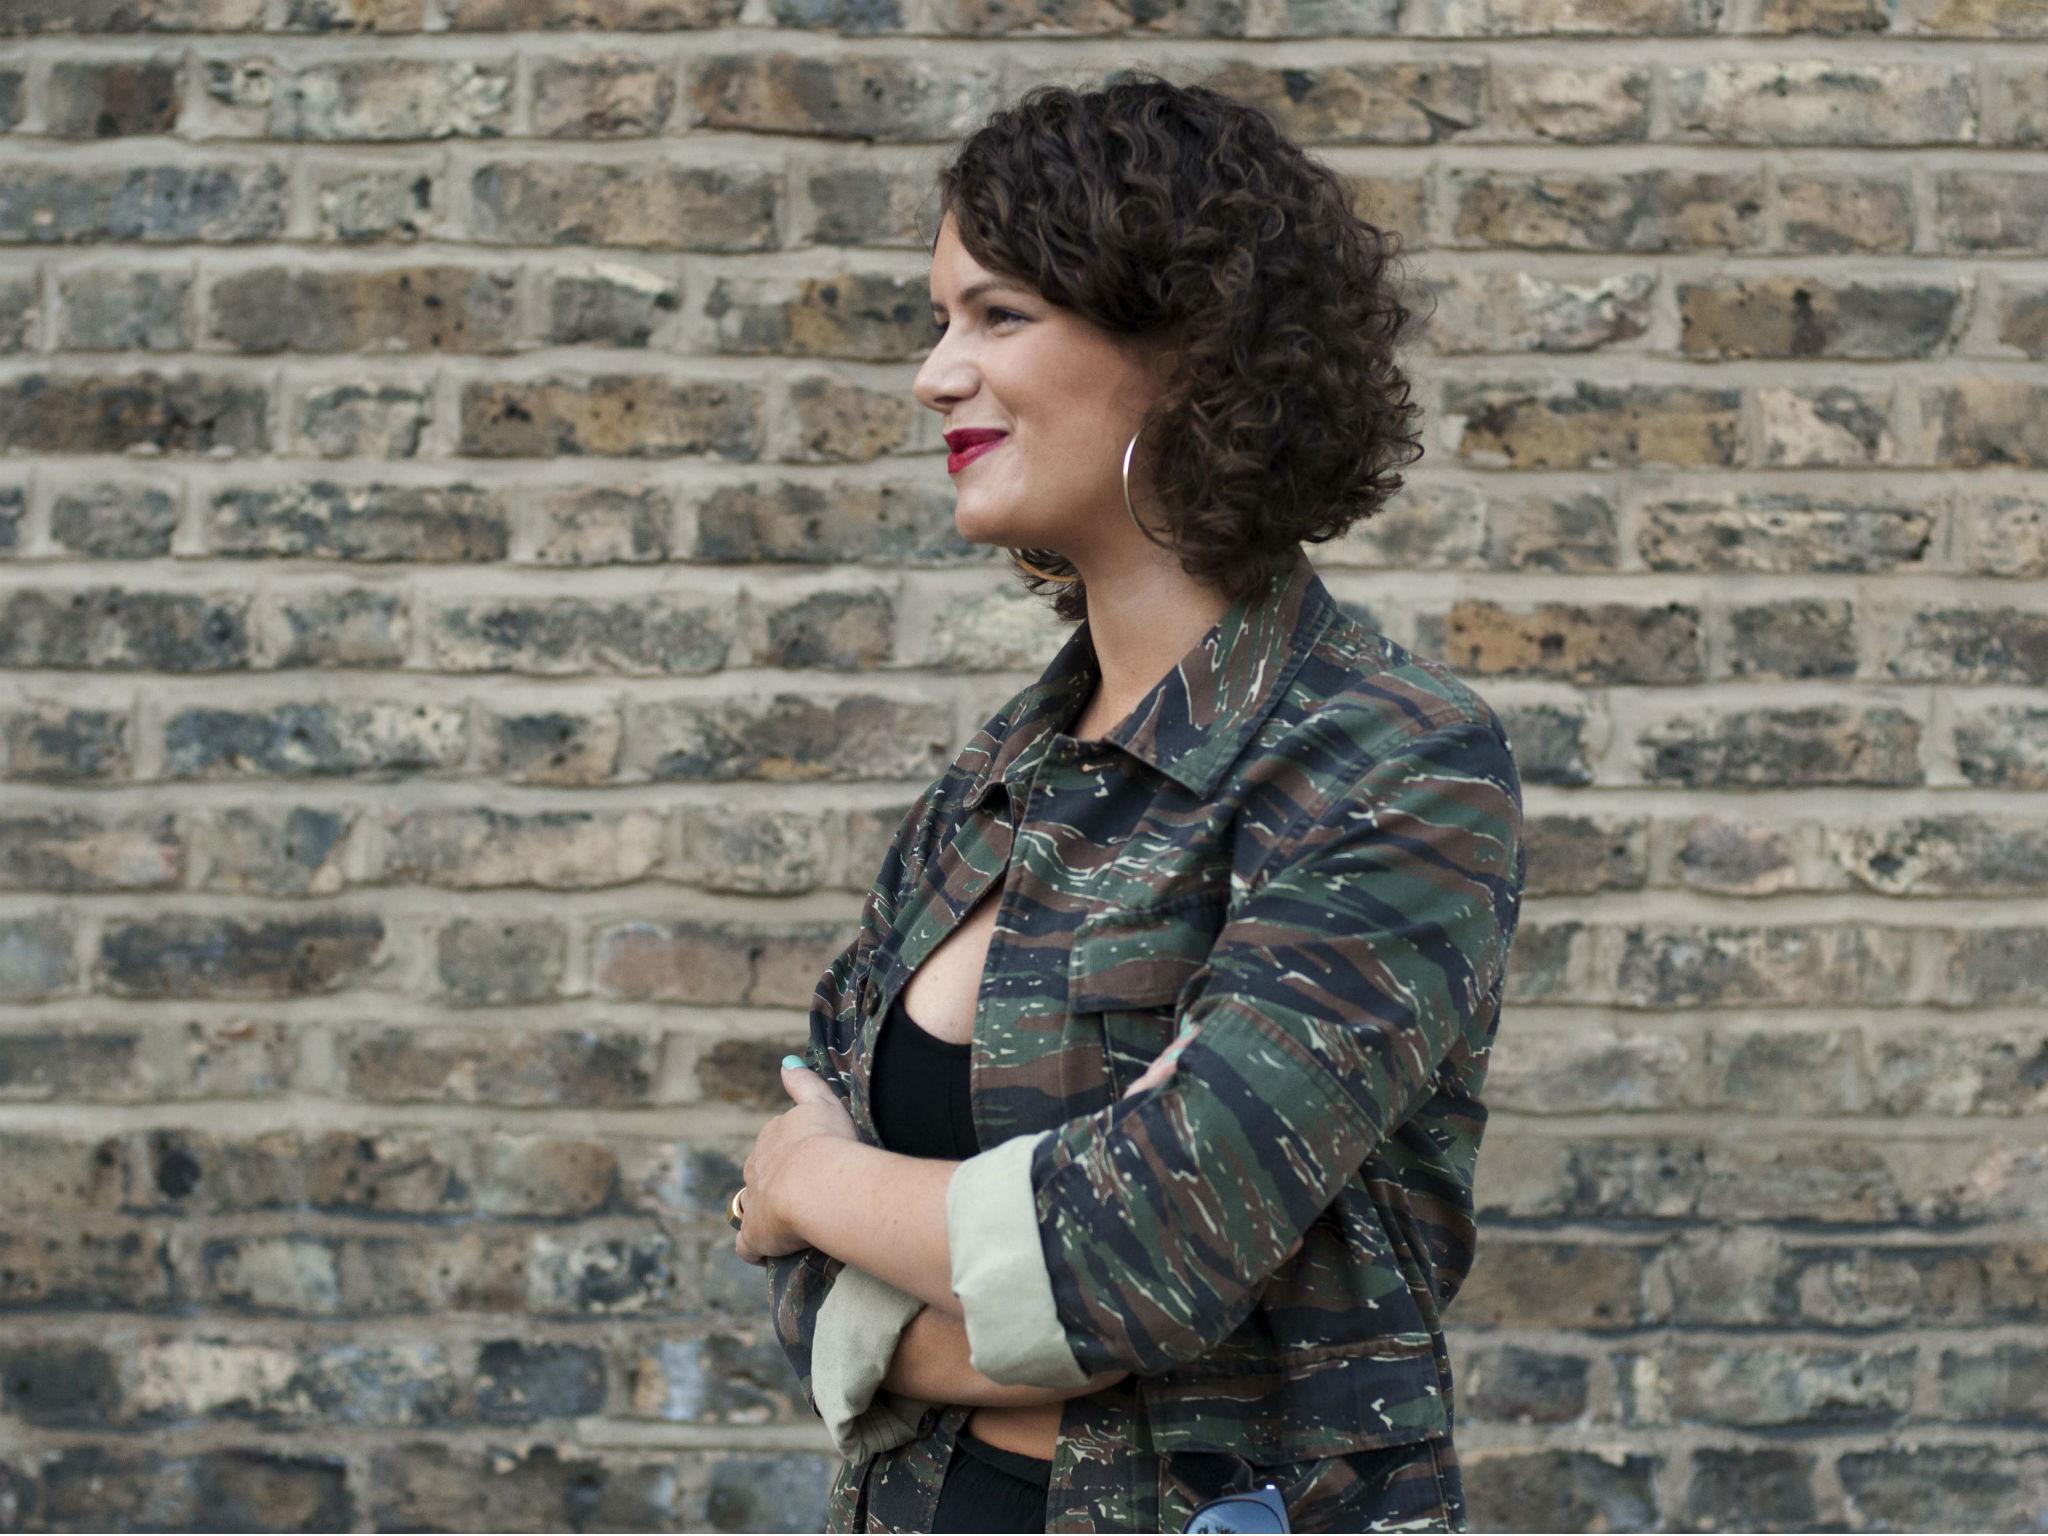 The DJ Emily Rawson founded Rock the Belles, an all-female DJ collective